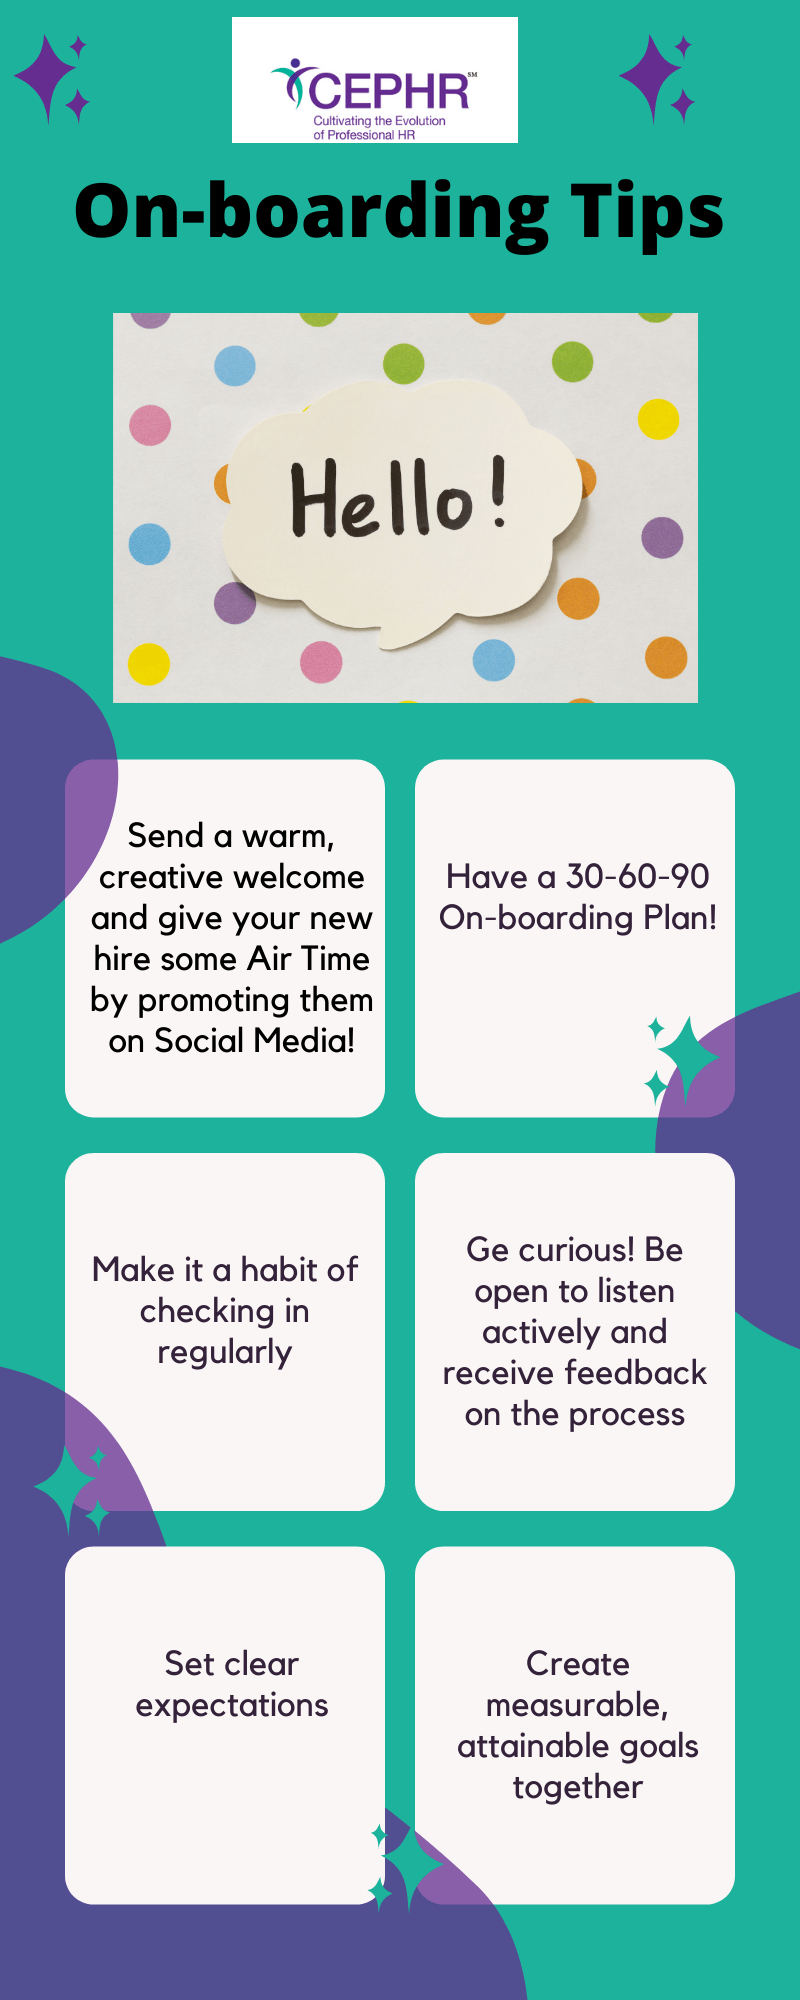 On boarding tips infographic